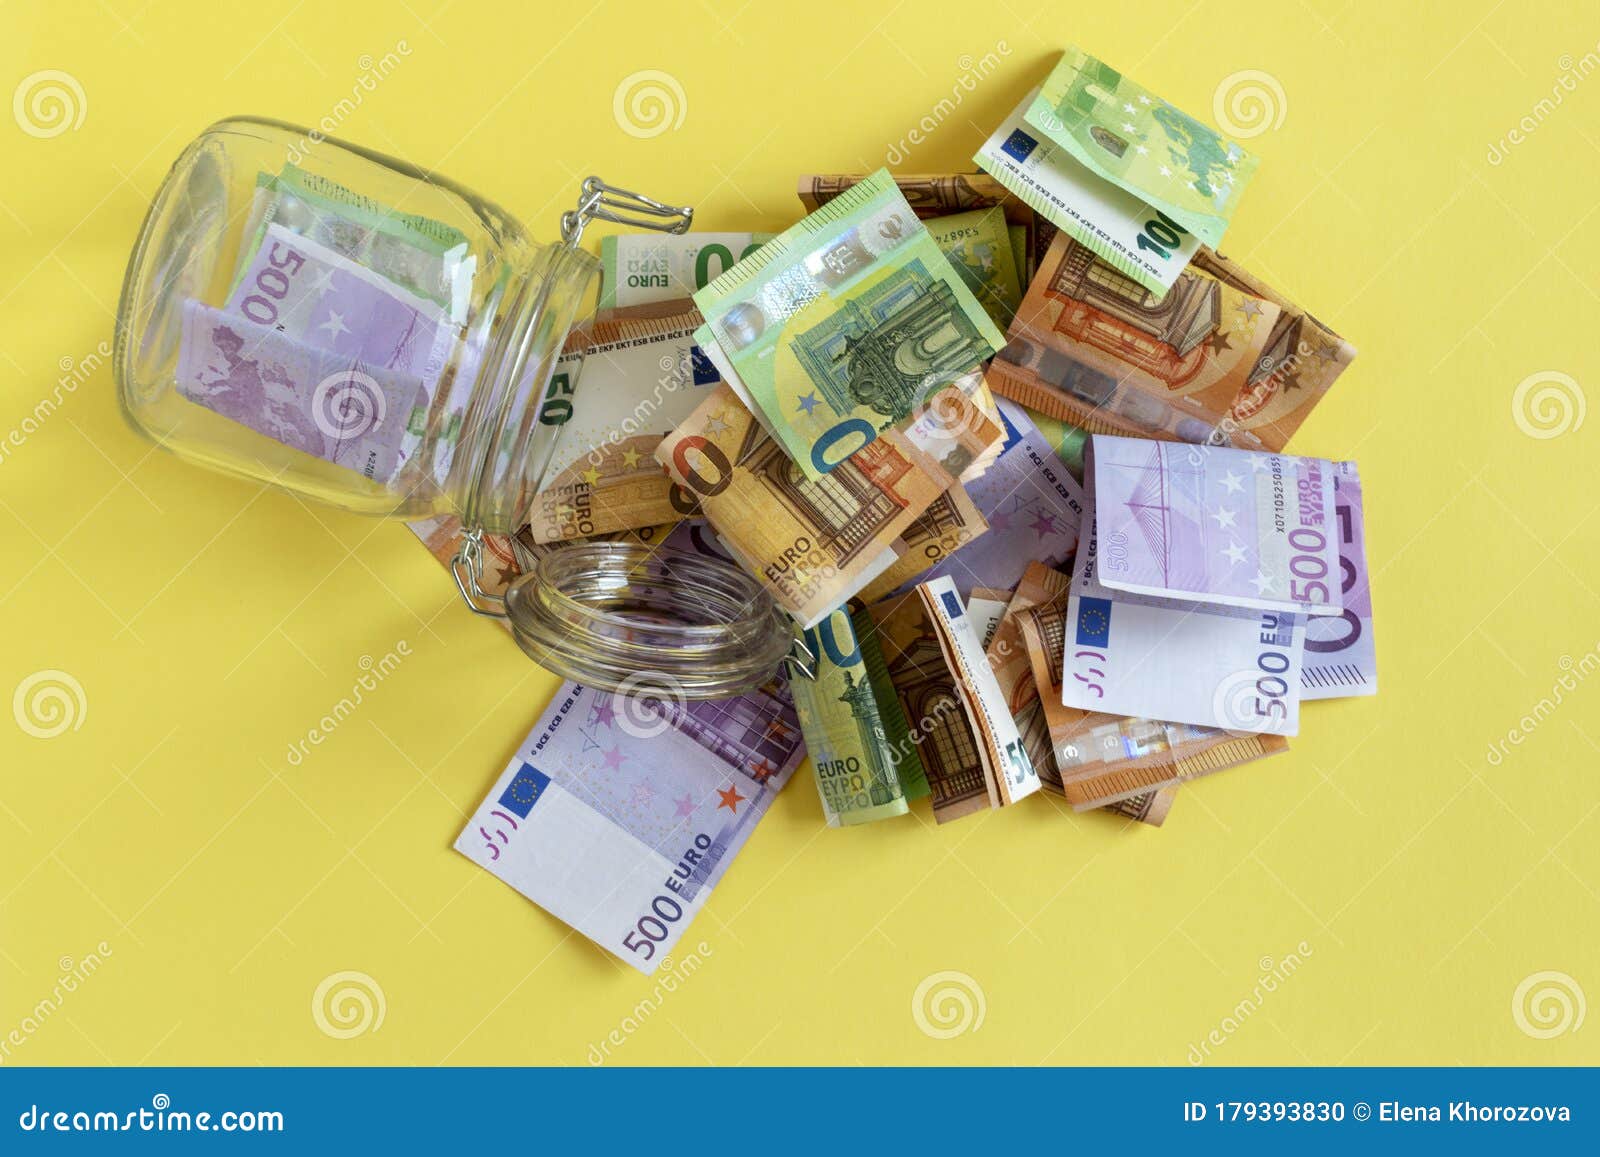 crisis and budget deficit concept. money and empty glass money jar. euro banknotes, money box. income, savings